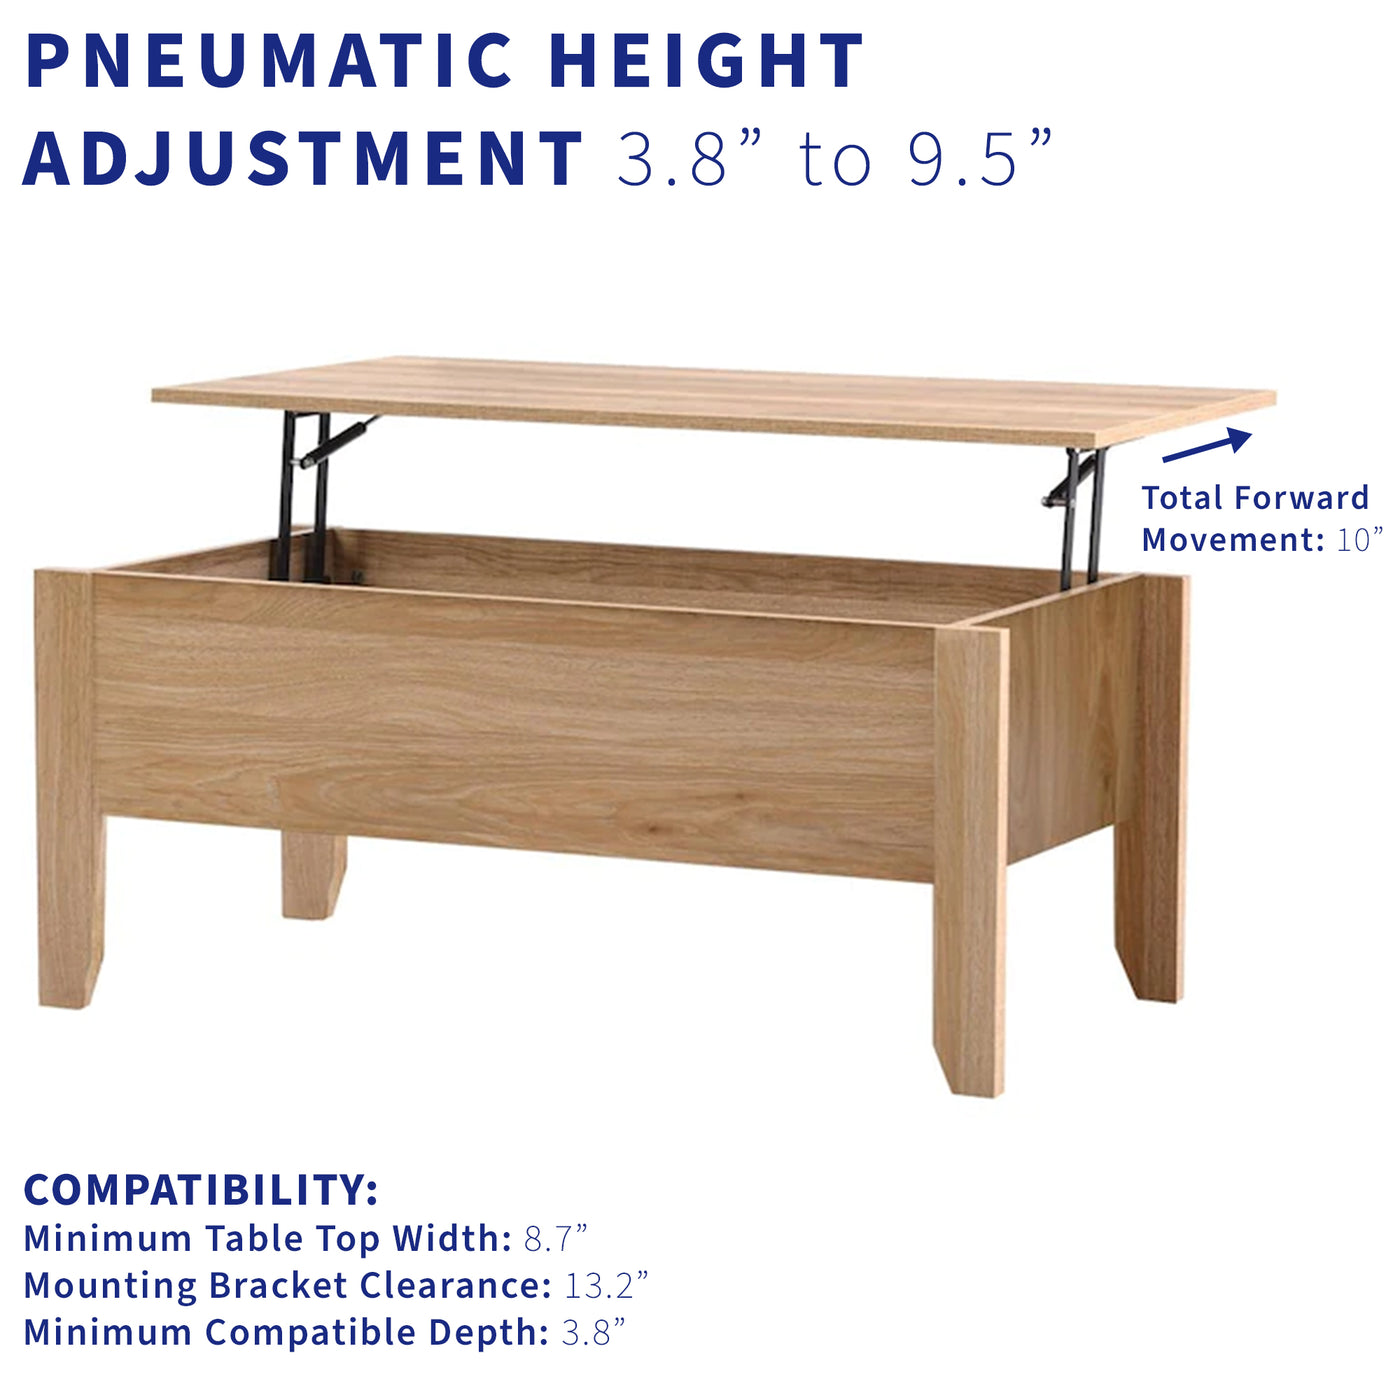 Pneumatic height adjustment and closure provided by two strong total forward movement arms.